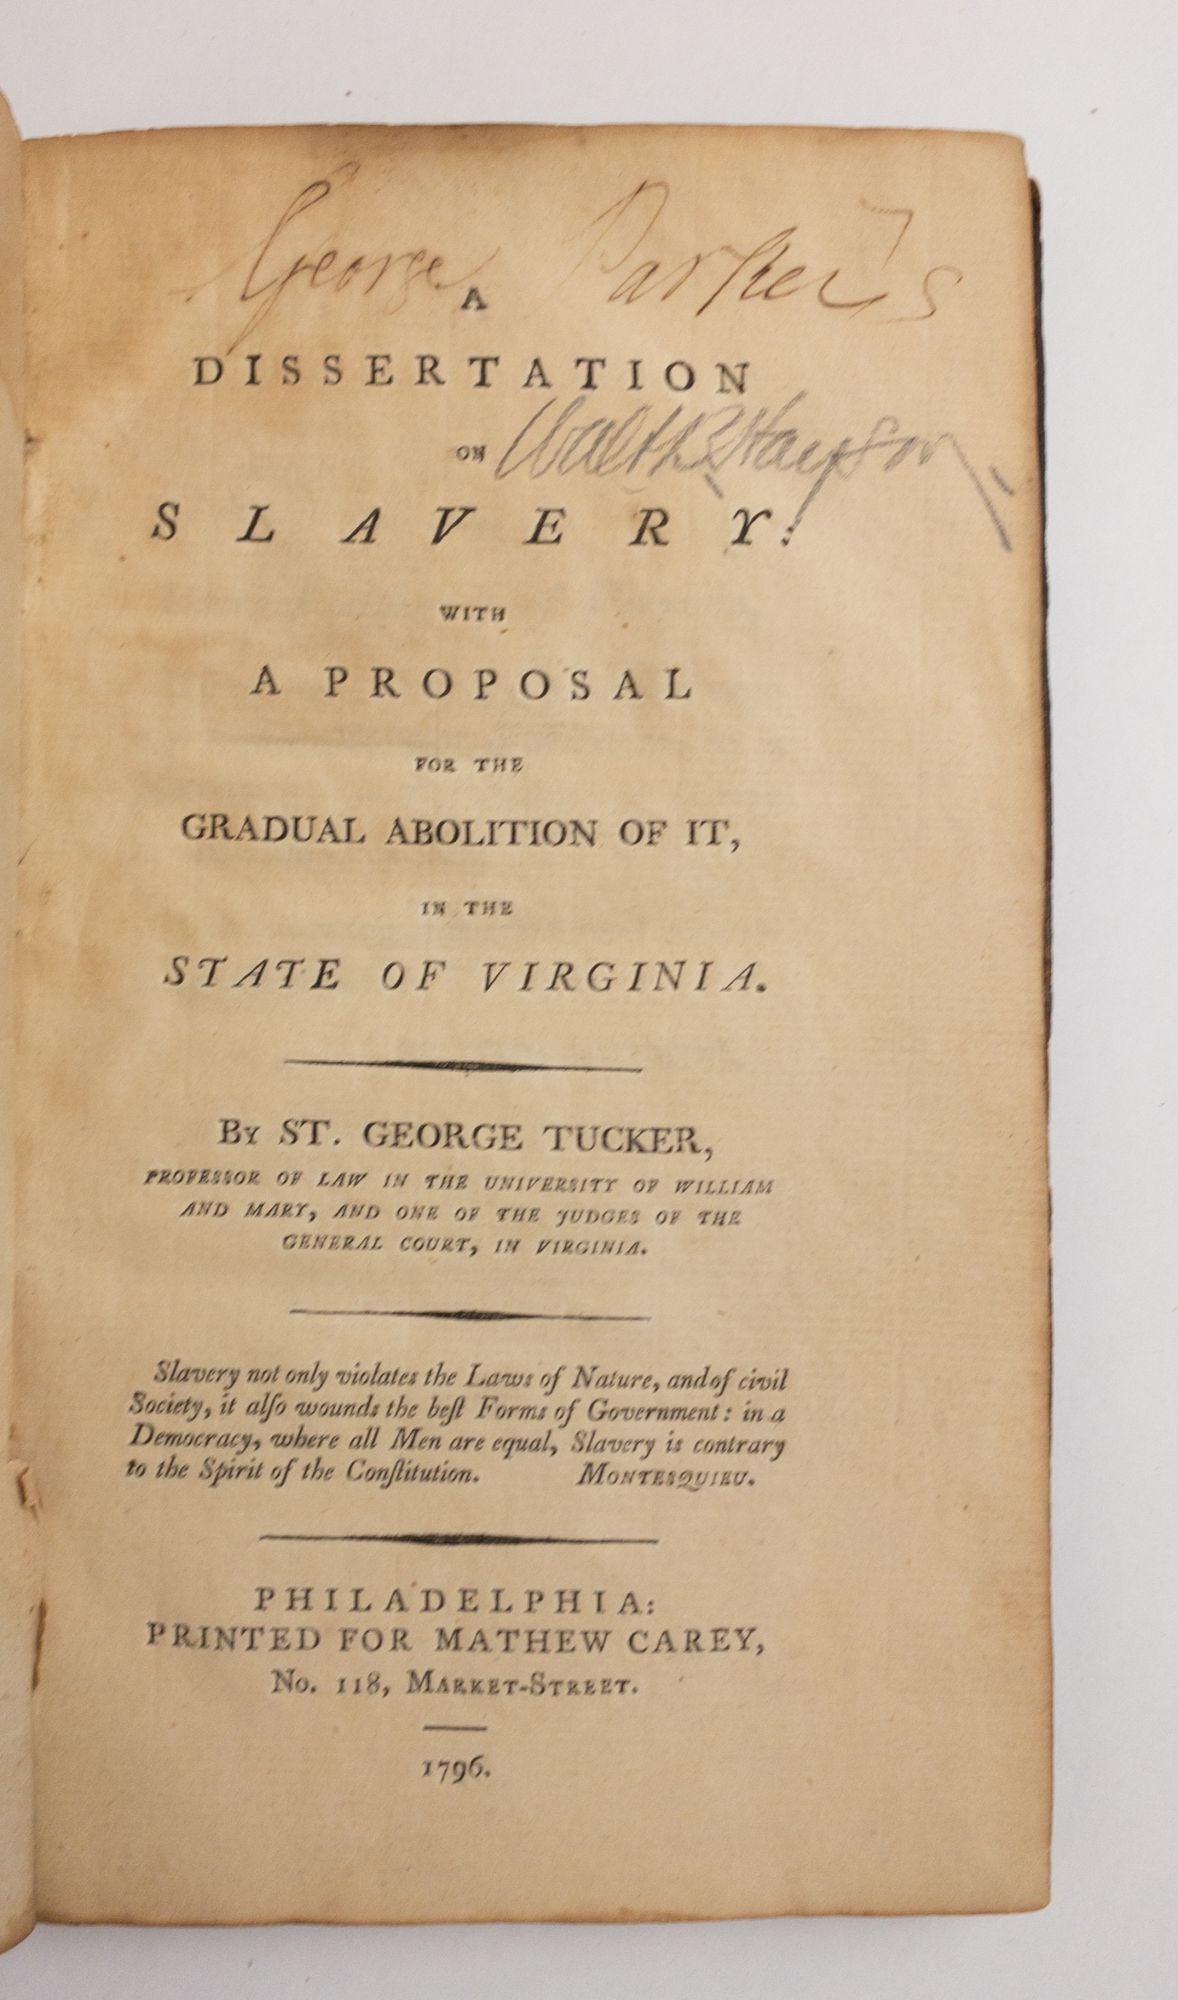 Product Image for A Dissertation on Slavery with A Proposal for the Gradual Abolition of It, in the State of Virginia [George Upshur's Copy]